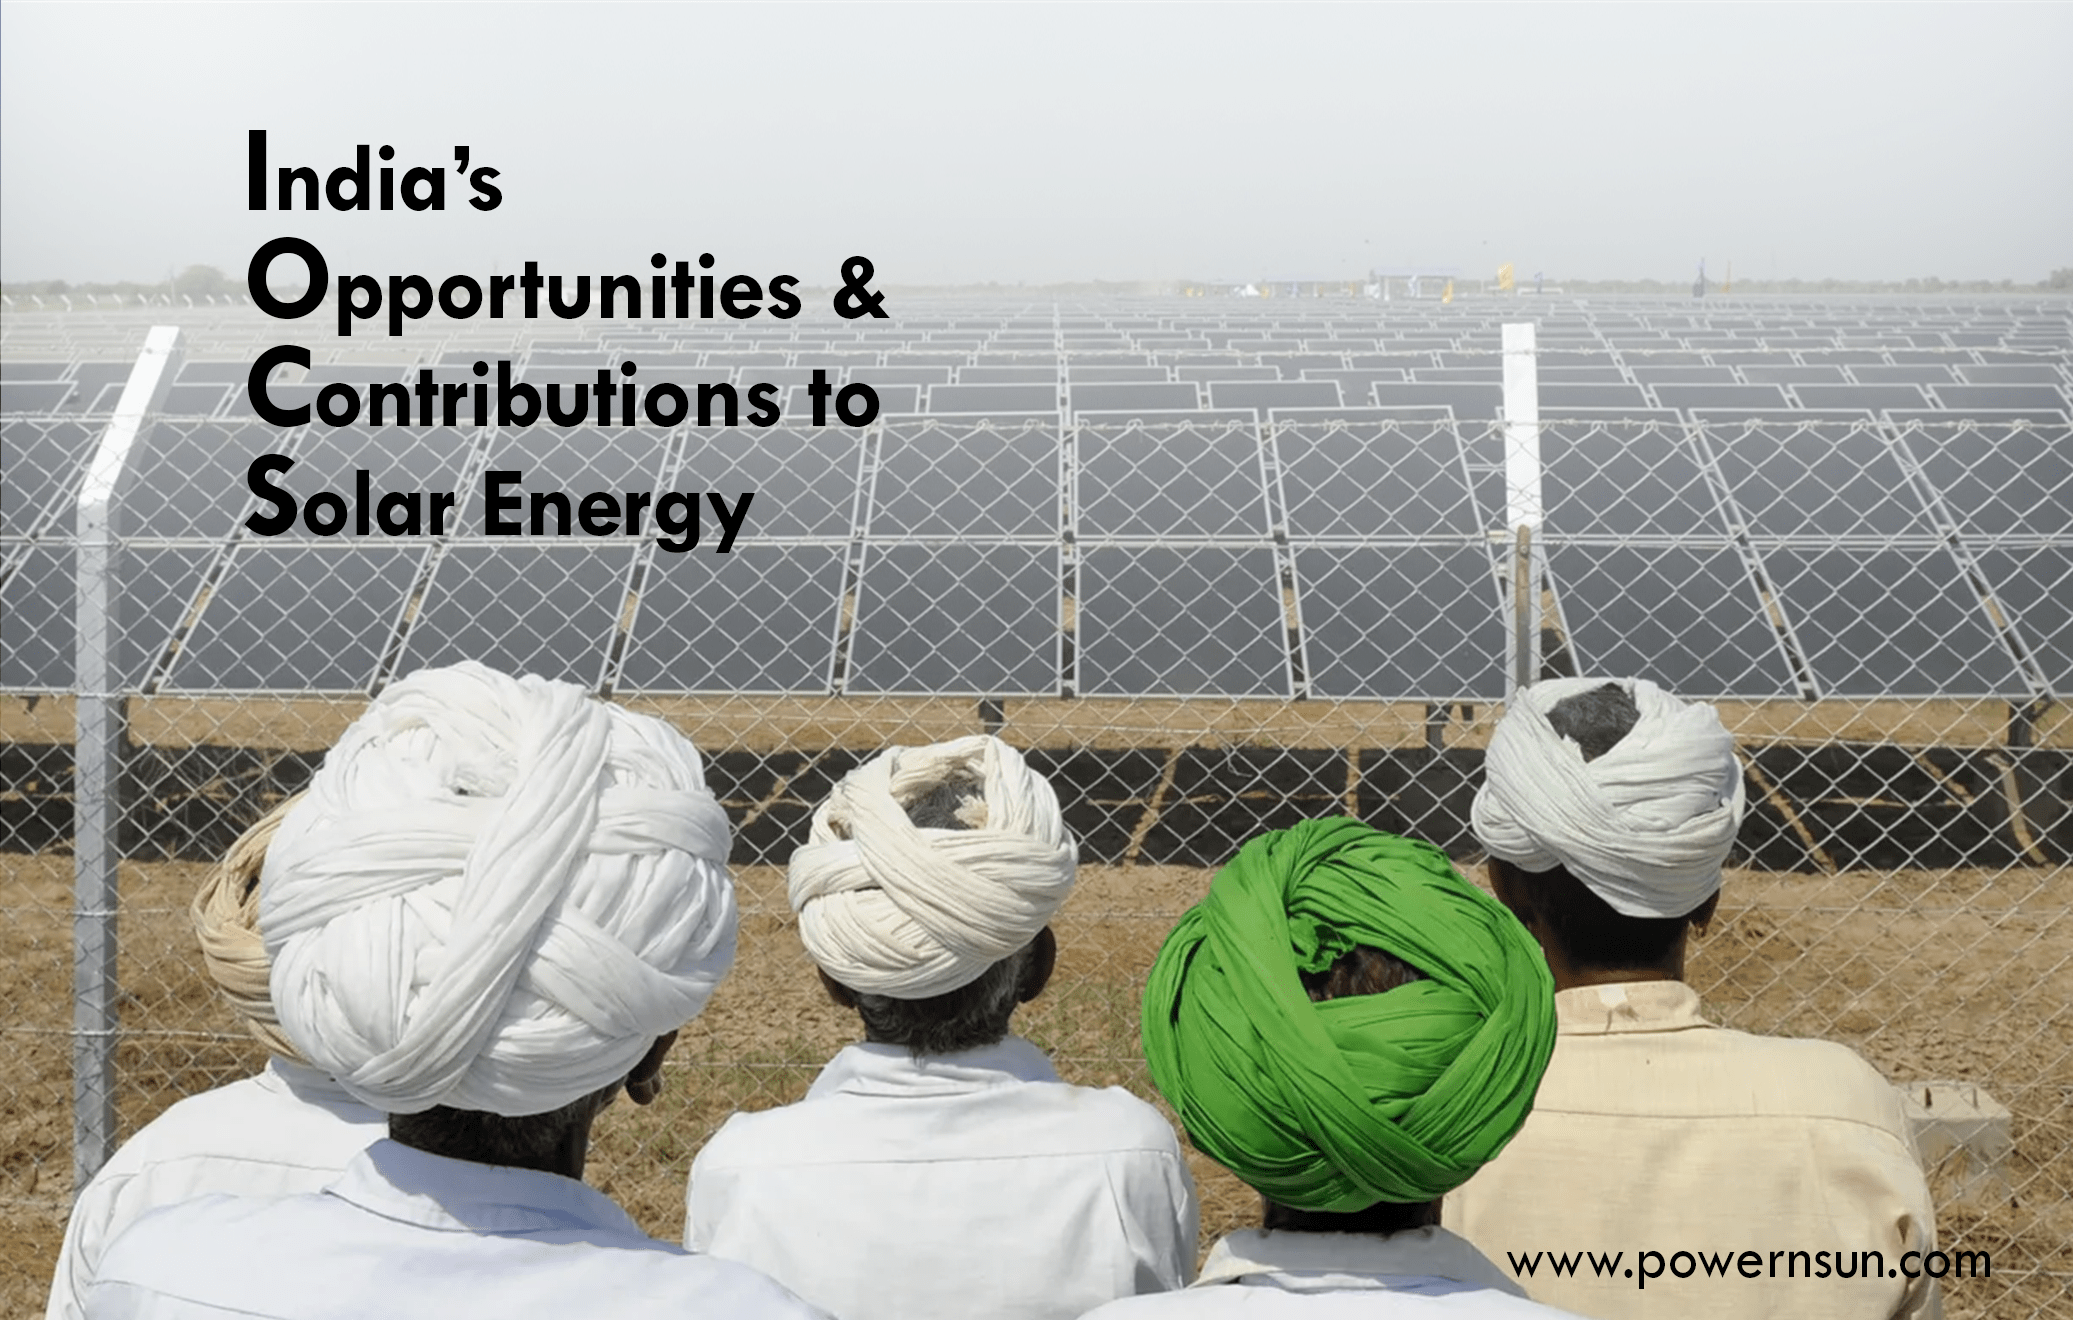 India’s Opportunities and Contributions to solar energy.